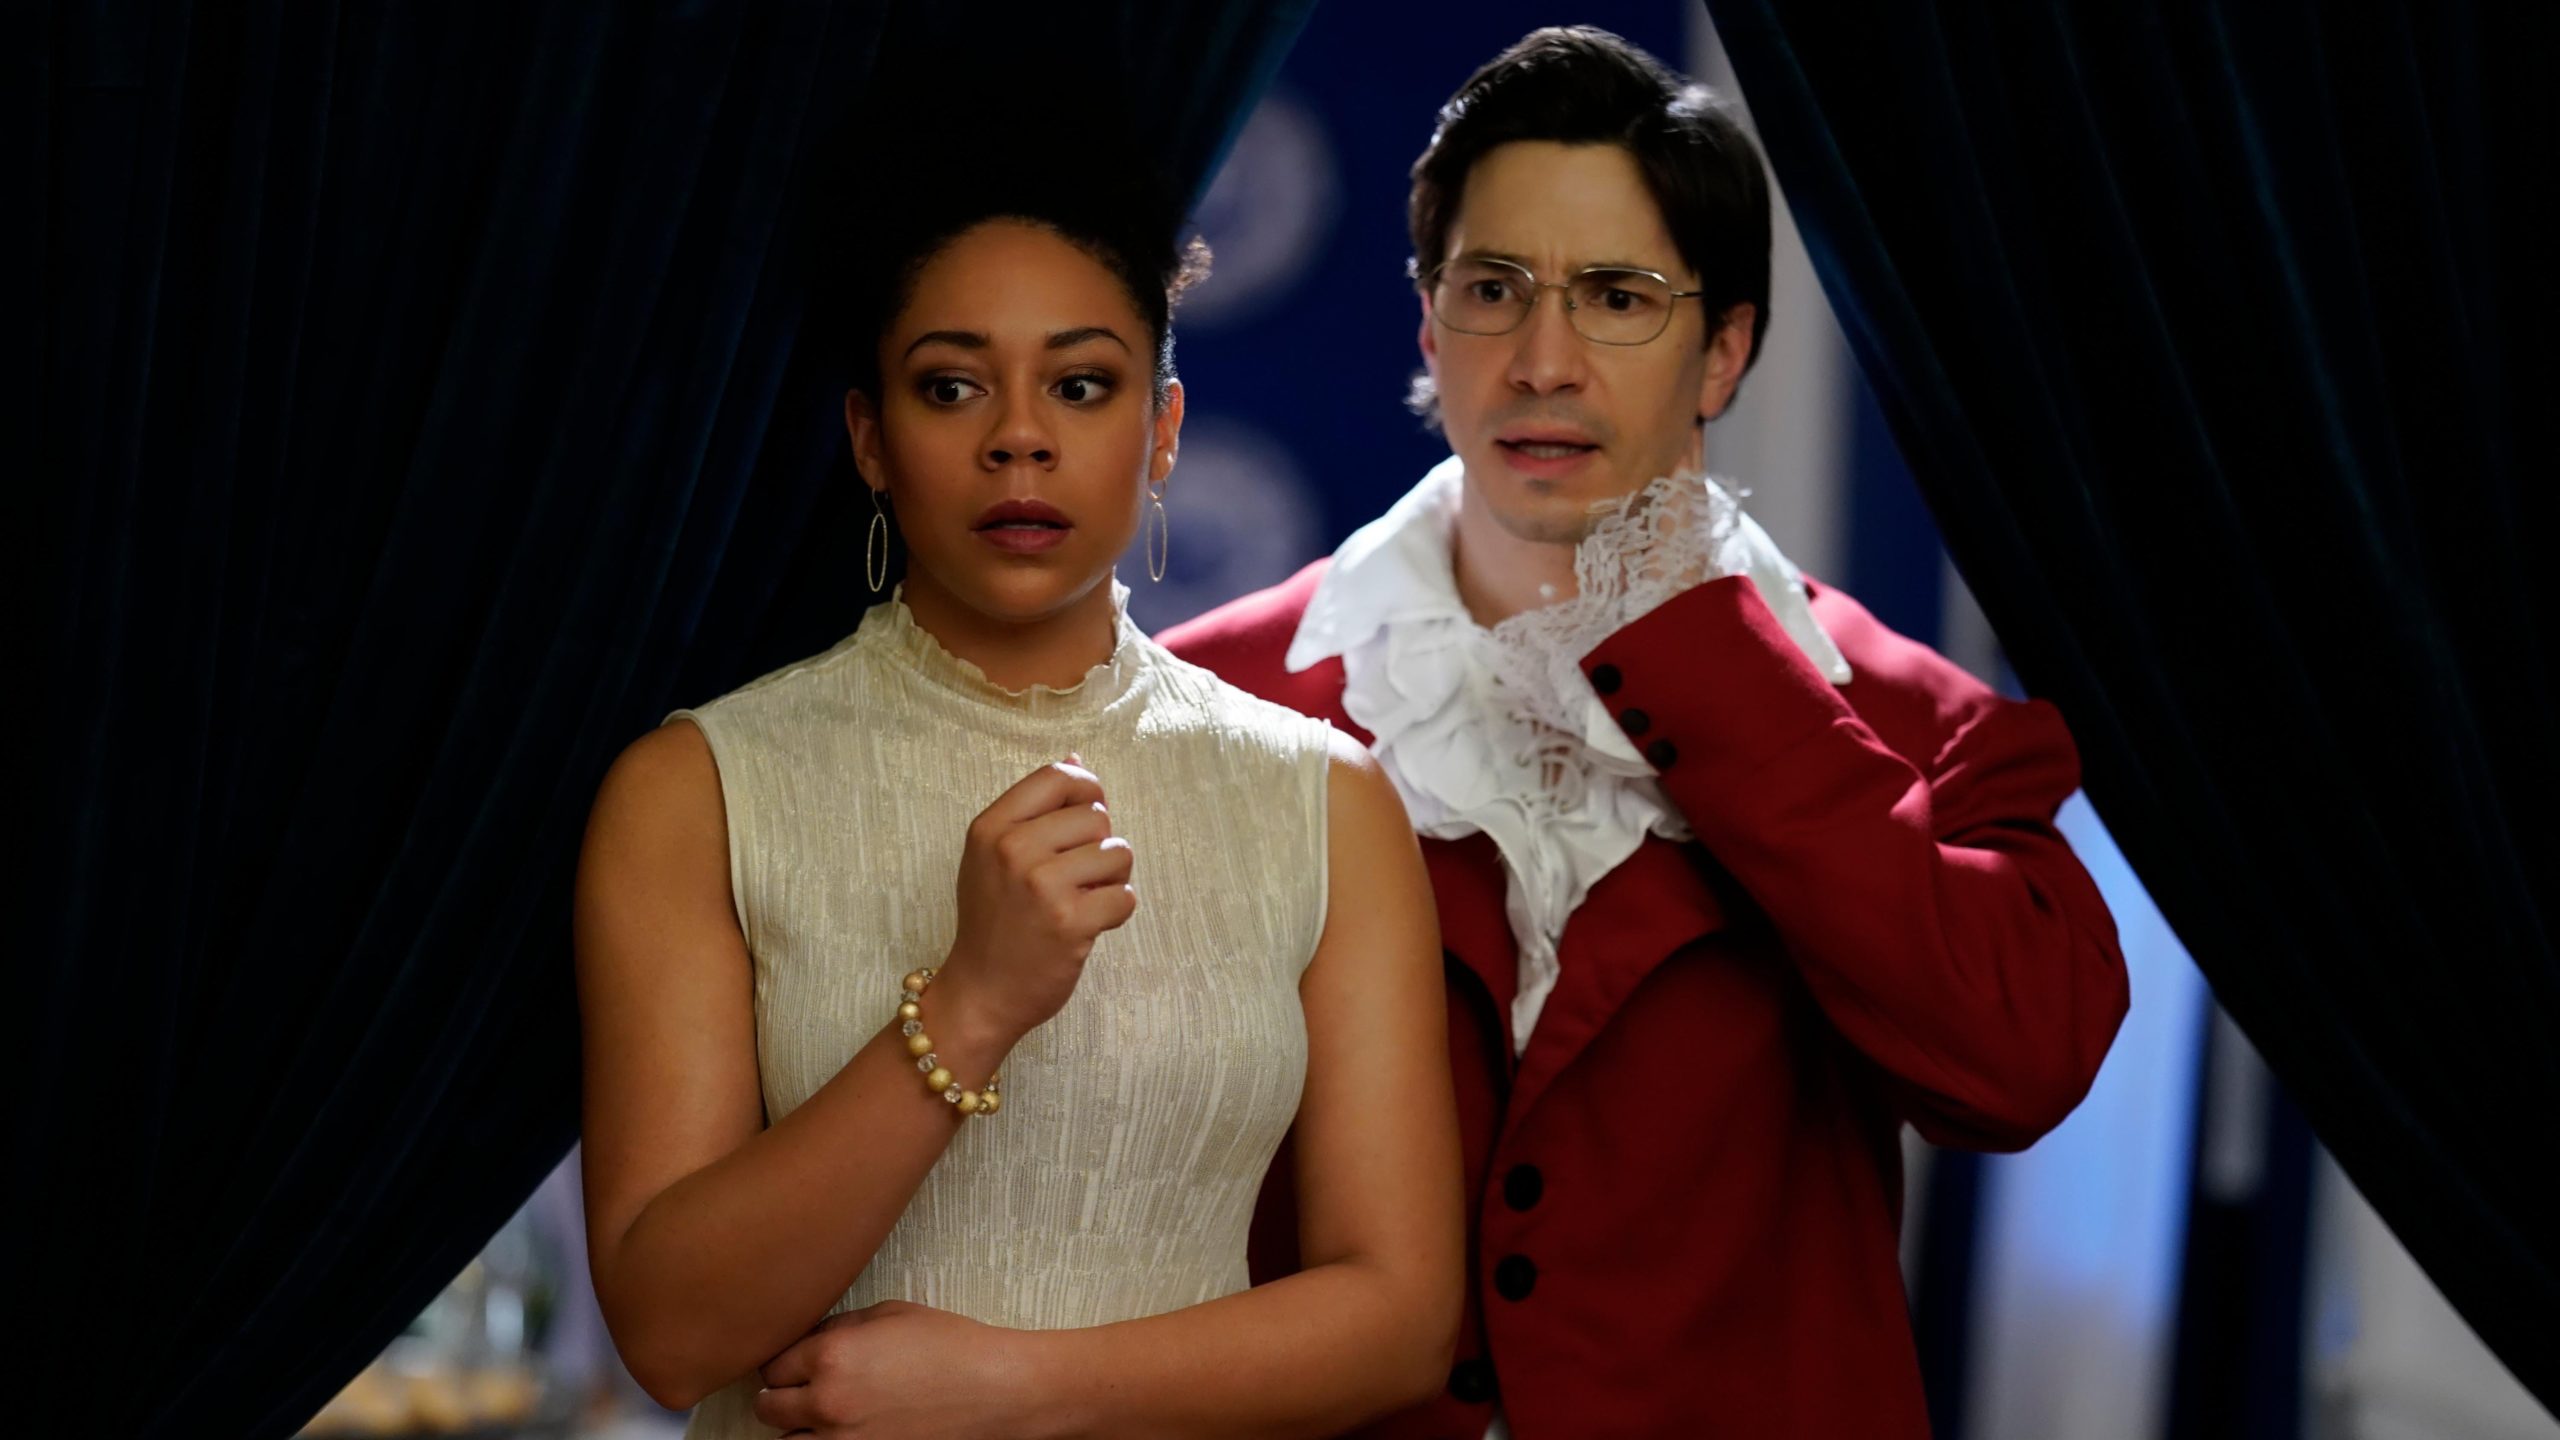 Nia (Tamara Austin) and Max (Justin Long) in yet another photo of characters from this movie looking aghast. (Image: Lionsgate)